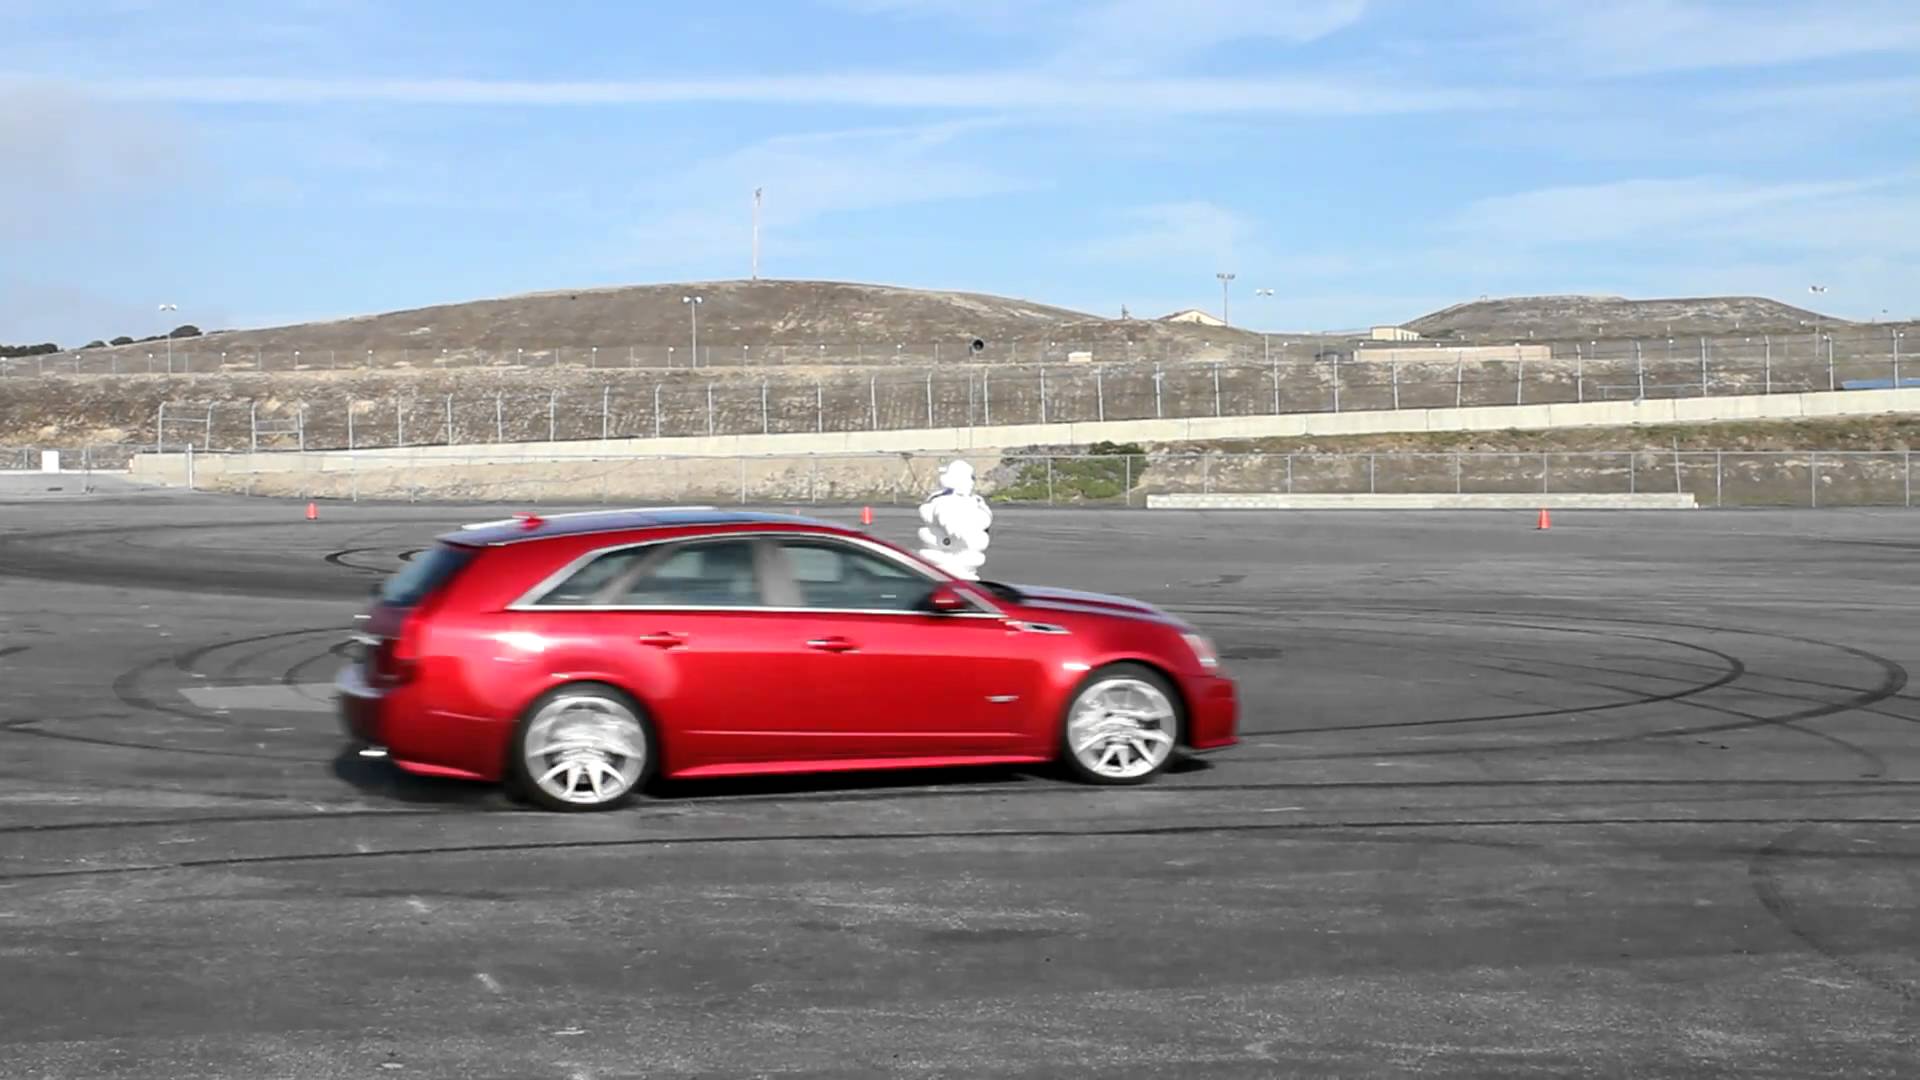 Burnout and Donuts with the 2011 Cadillac CTS-V Wagon